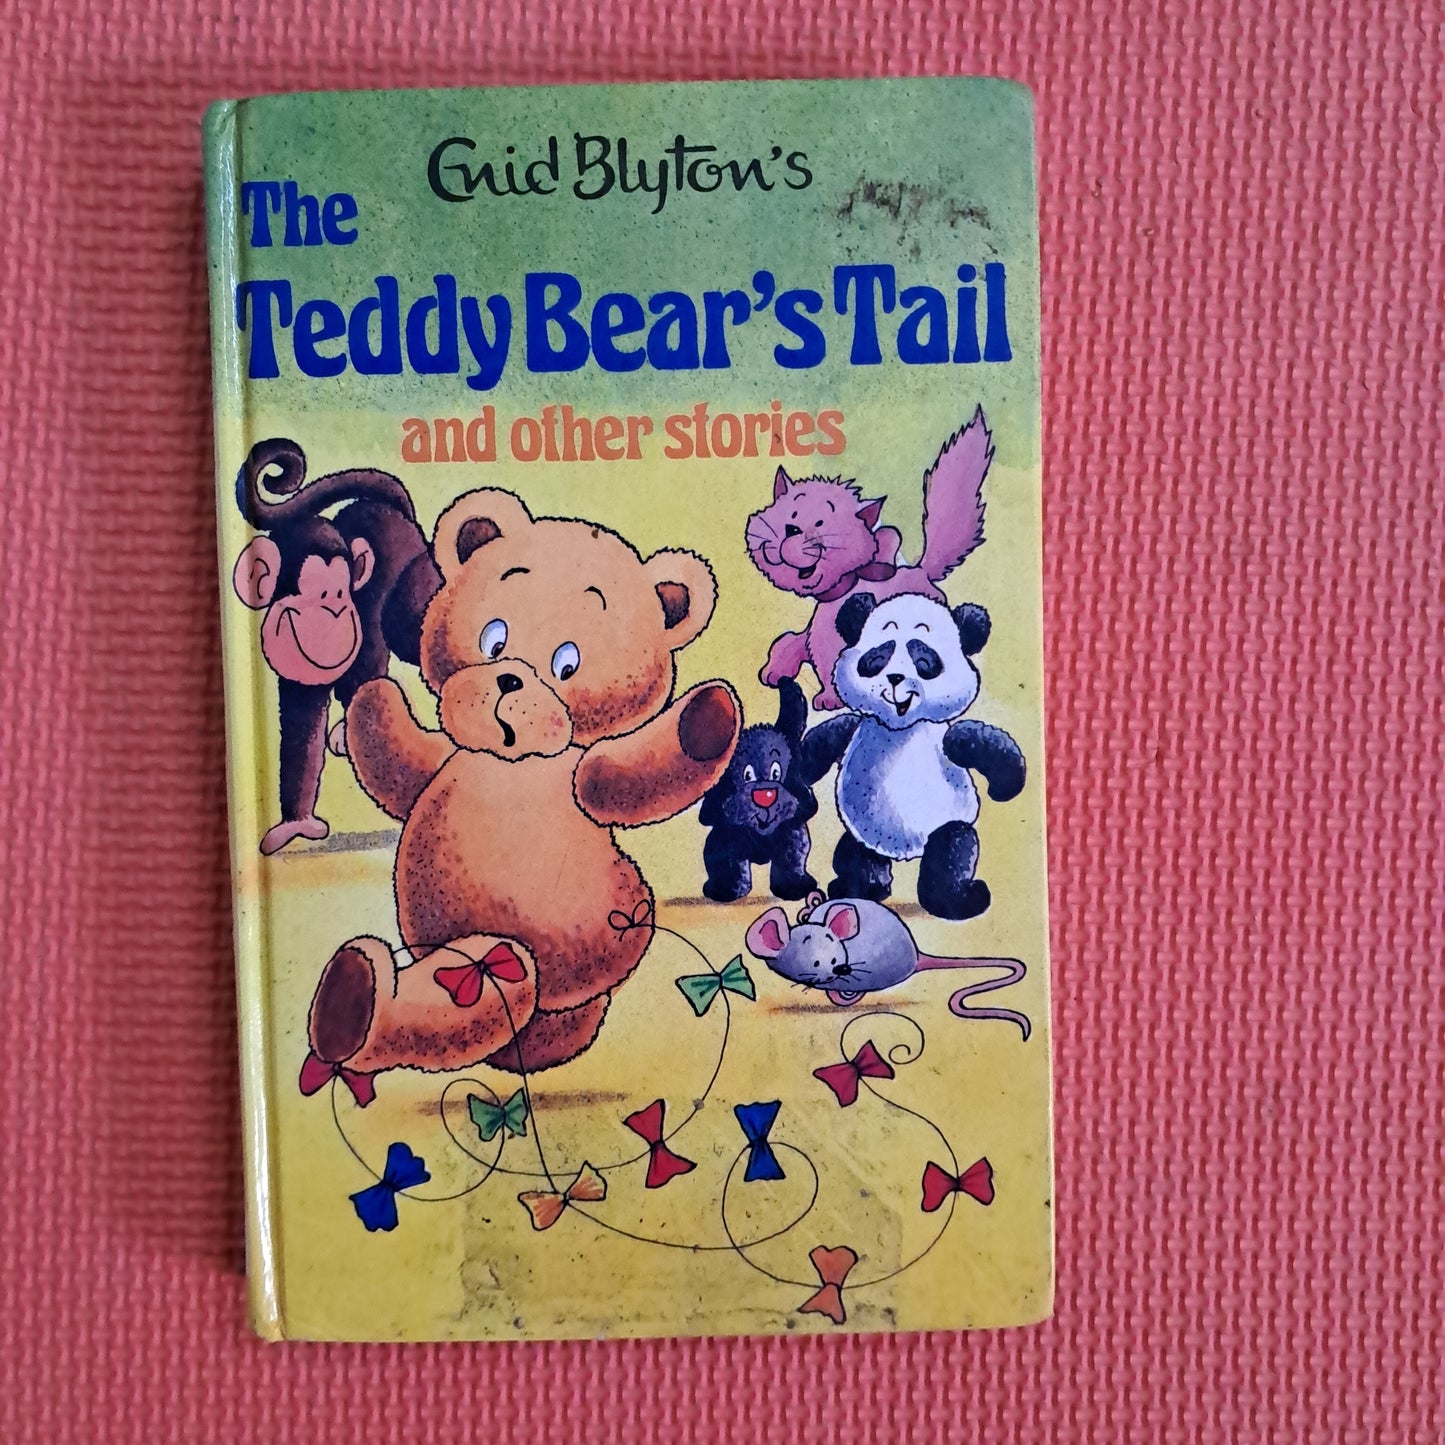 The Teddy Bear's Tail and other stories